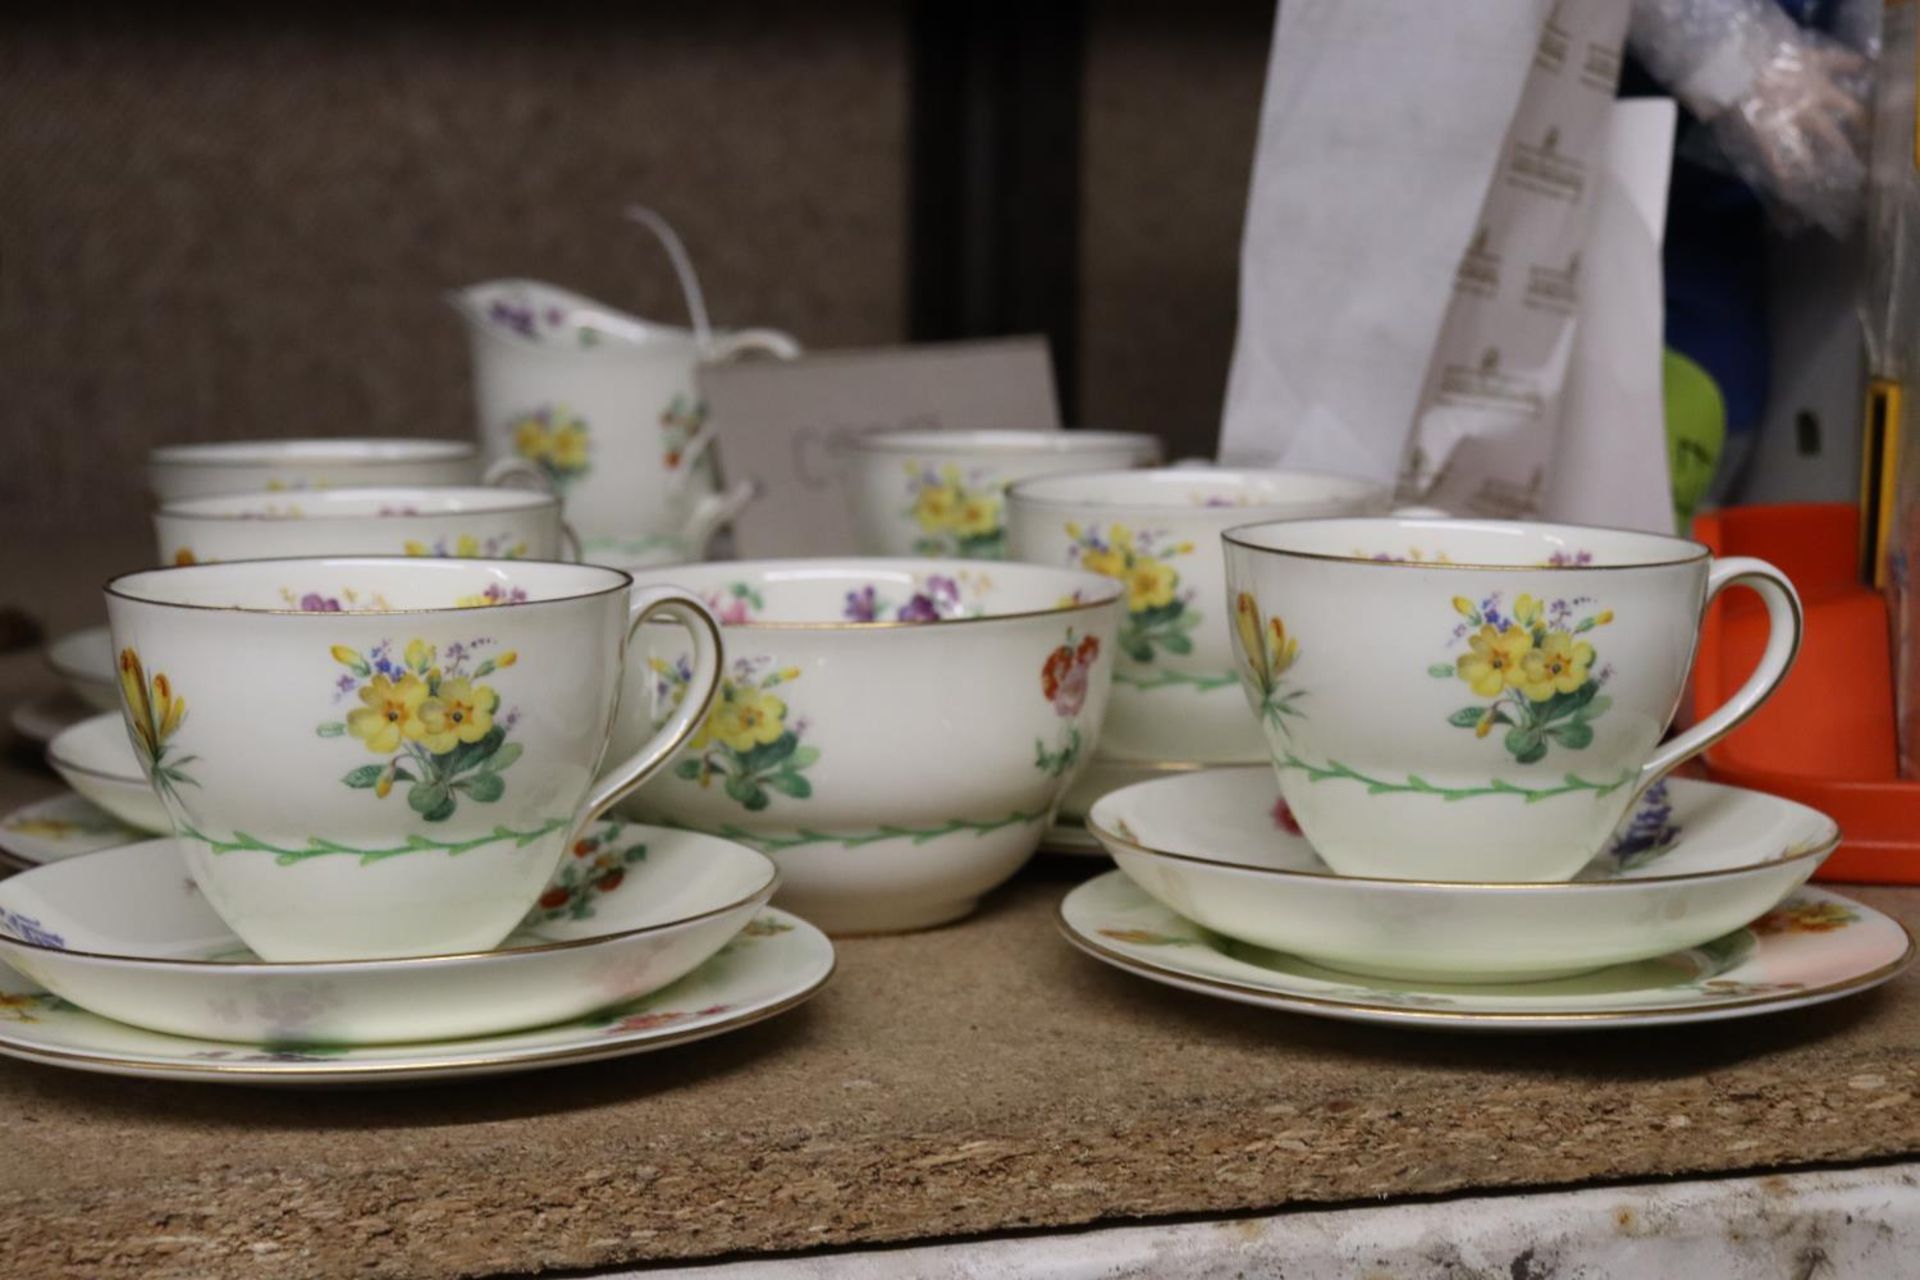 A VINTAGE ROYAL DOULTON TEASET, PALE YELLOW WITH SPRING FLOWERS, TO INCLUDE A CREAM JUG, SUGAR BOWL,